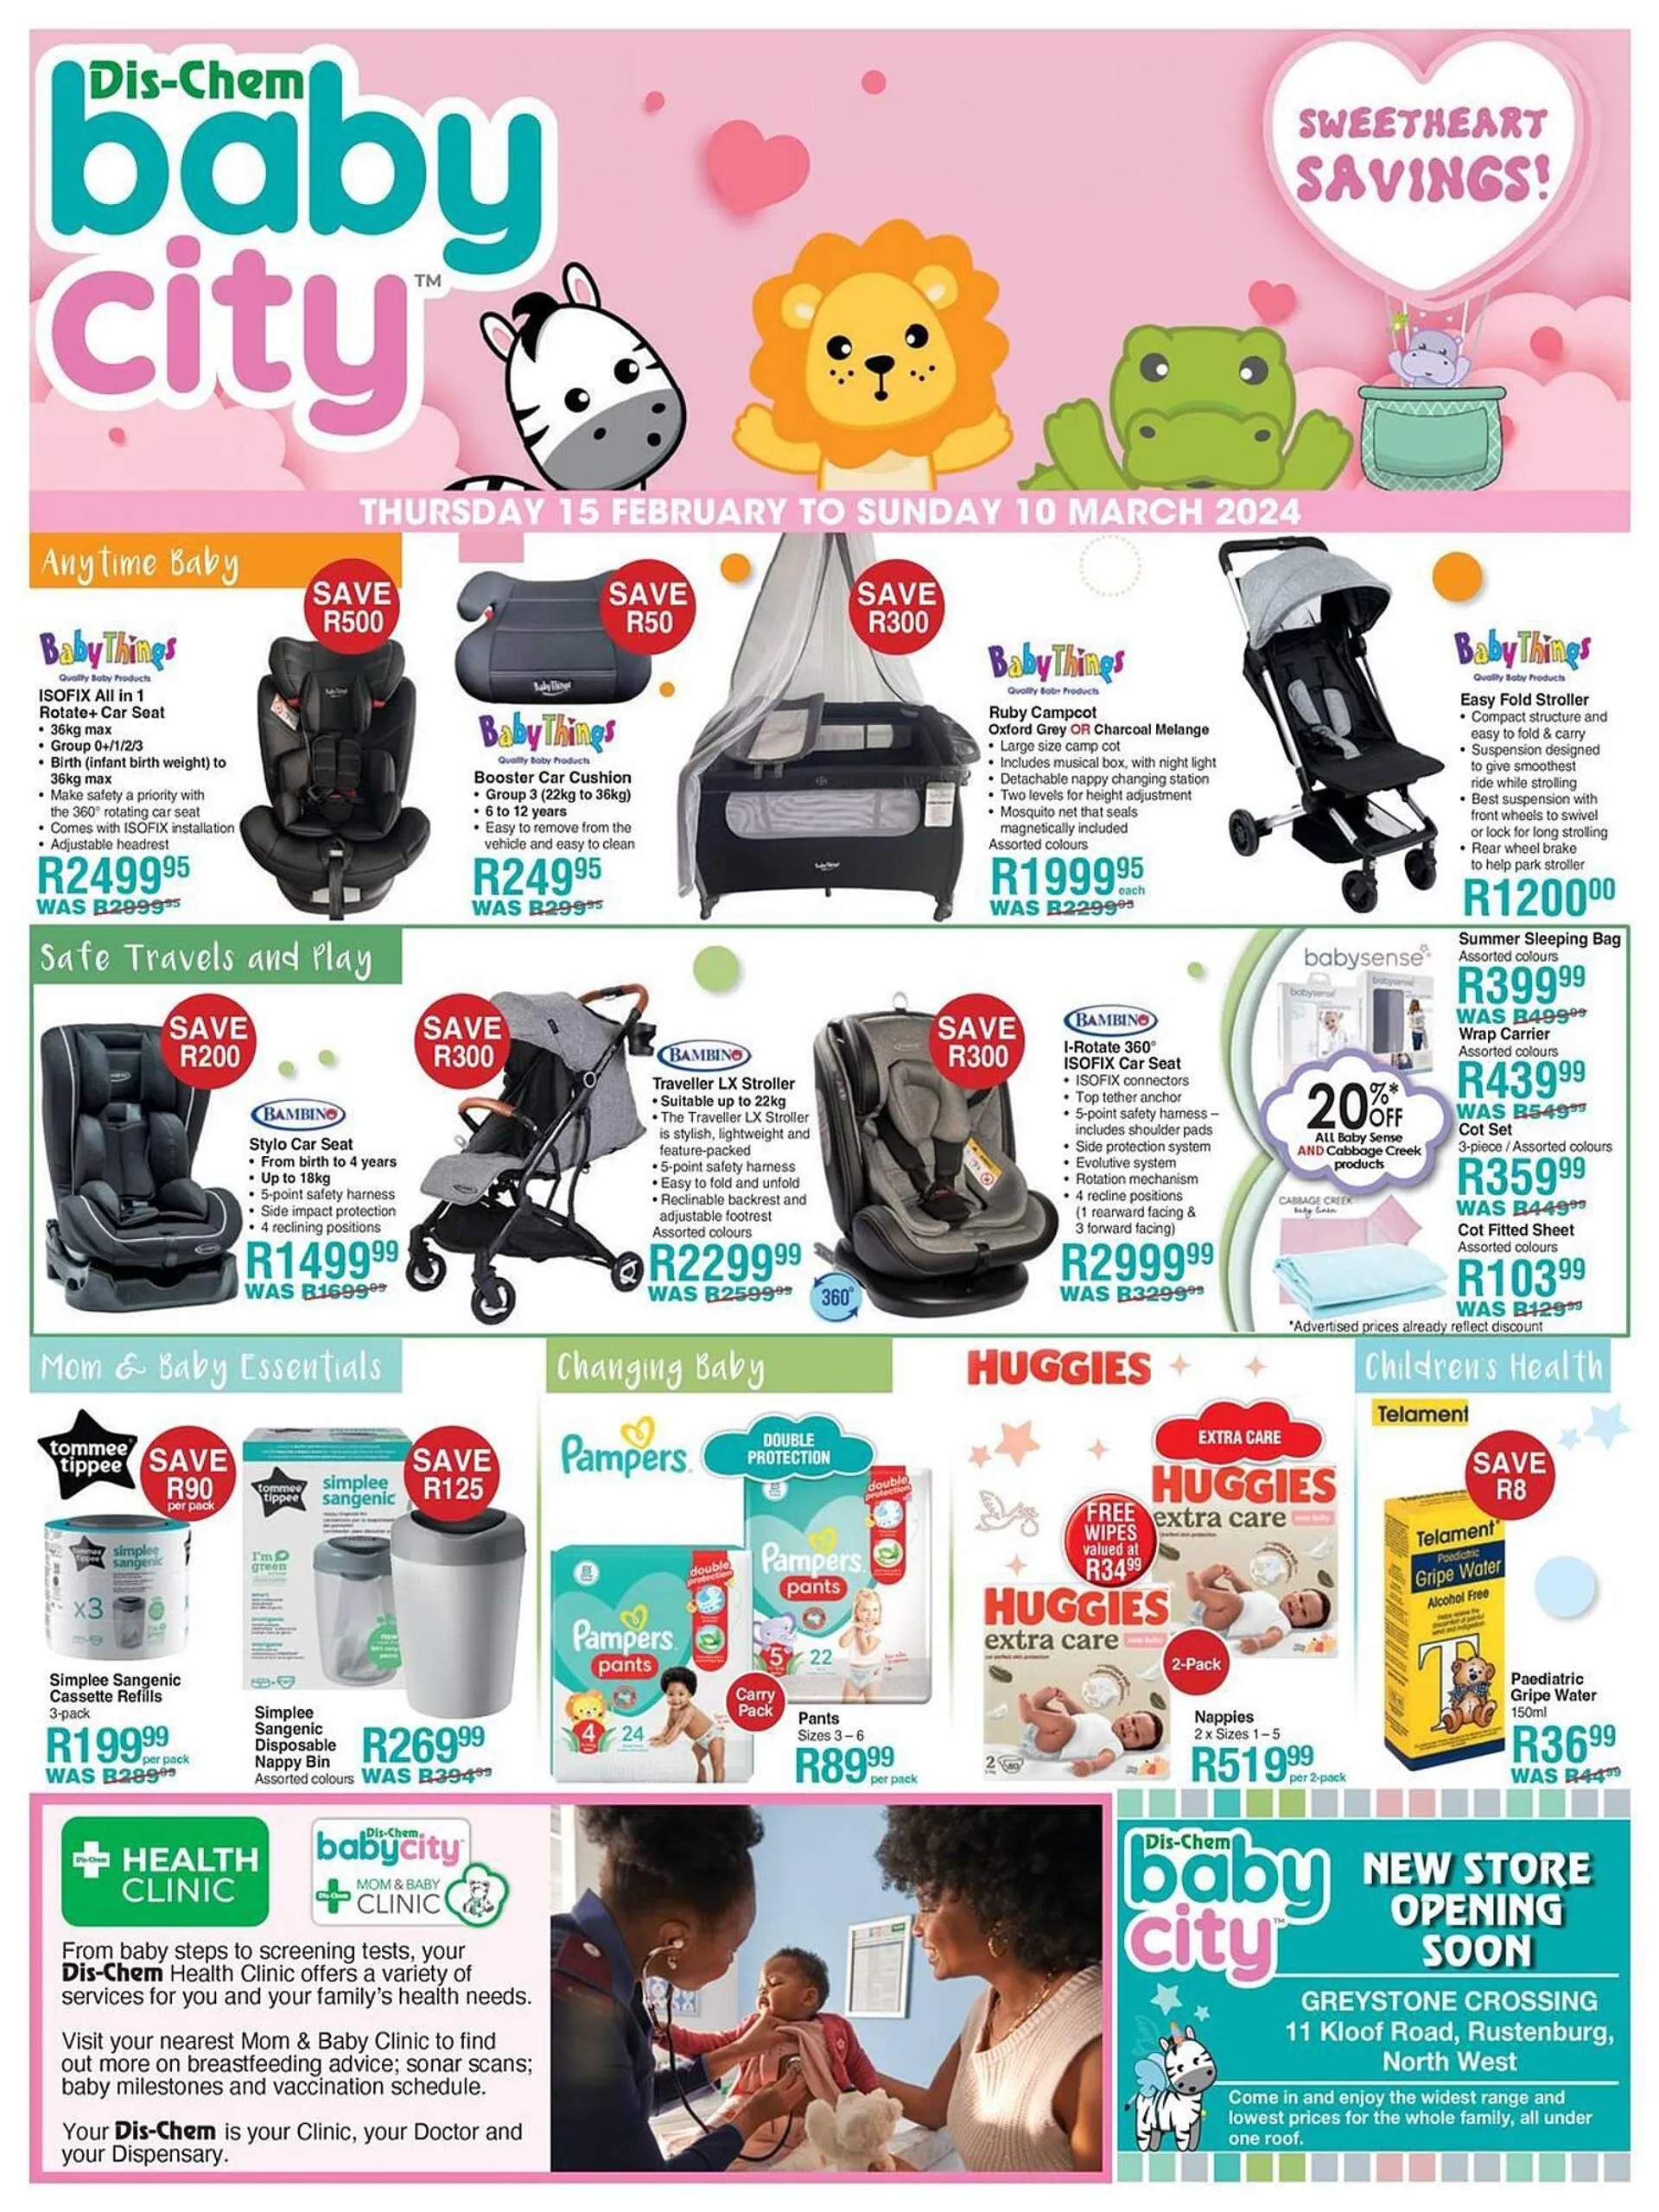 Baby City catalogue - 1 March 10 March 2024